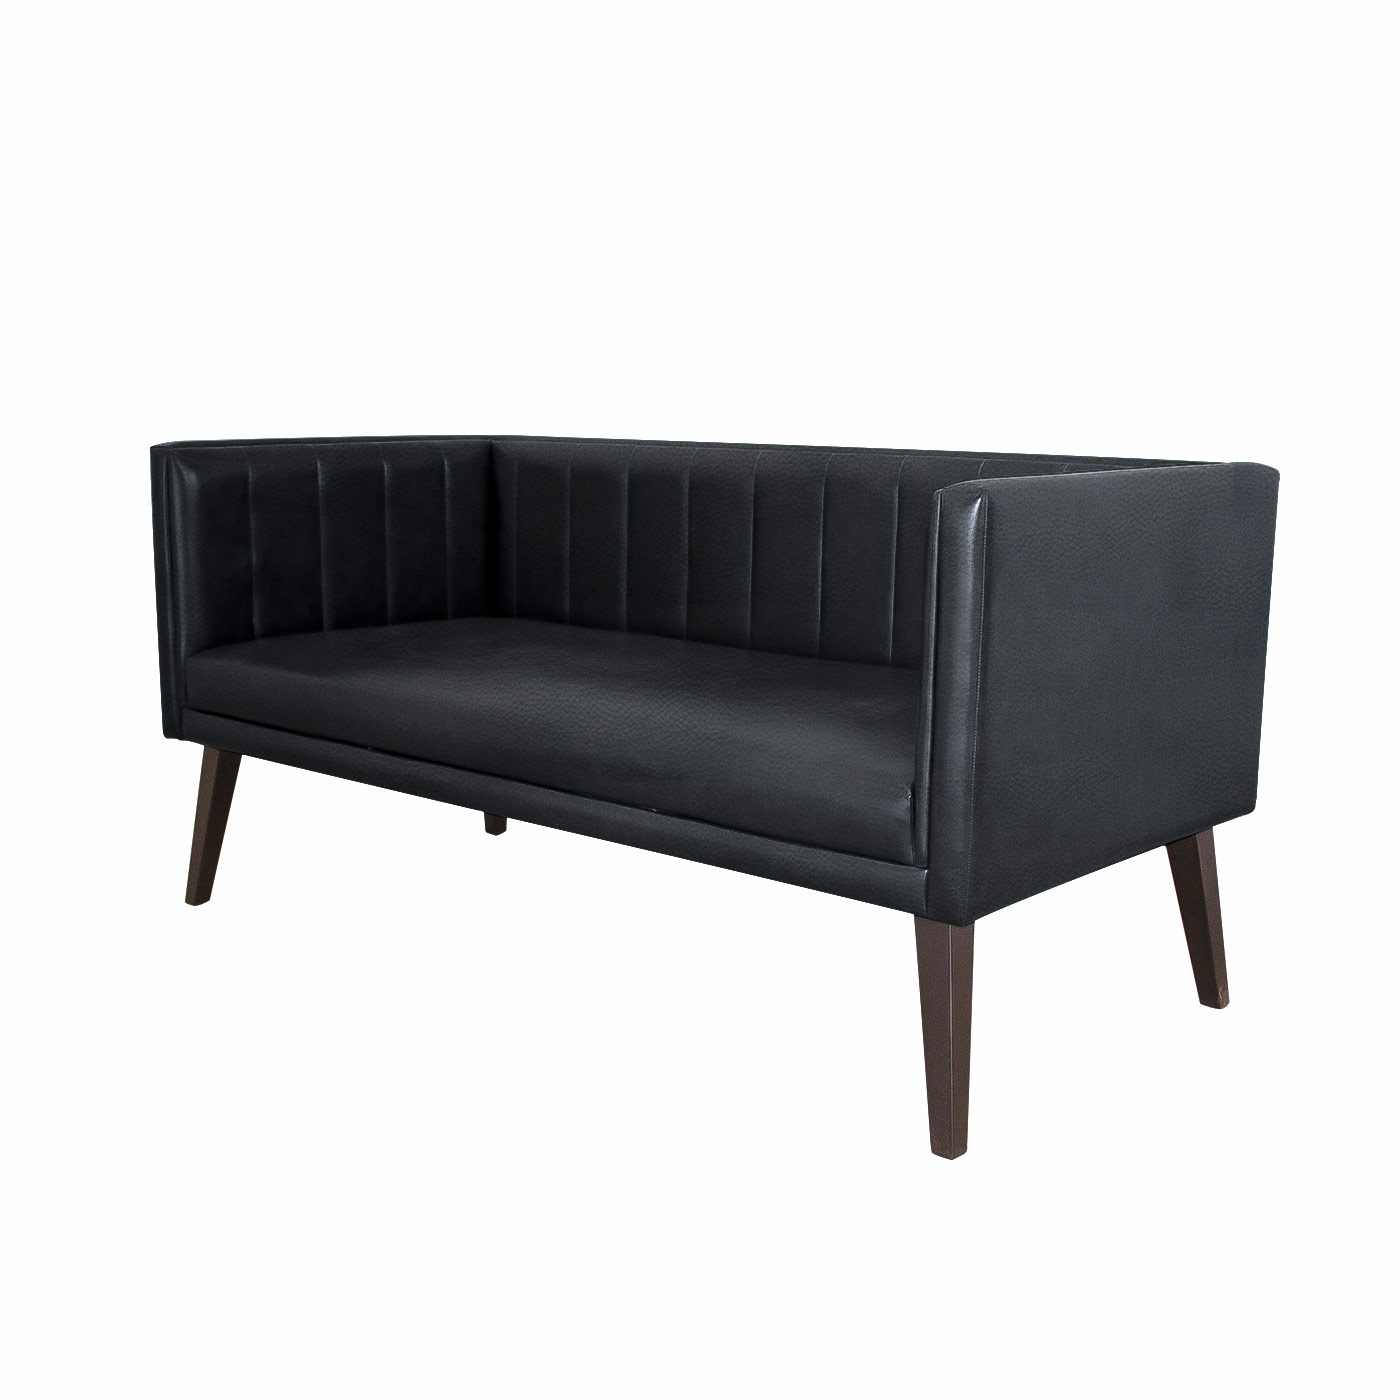 Melrose Faux Leather Dark Double Sofa